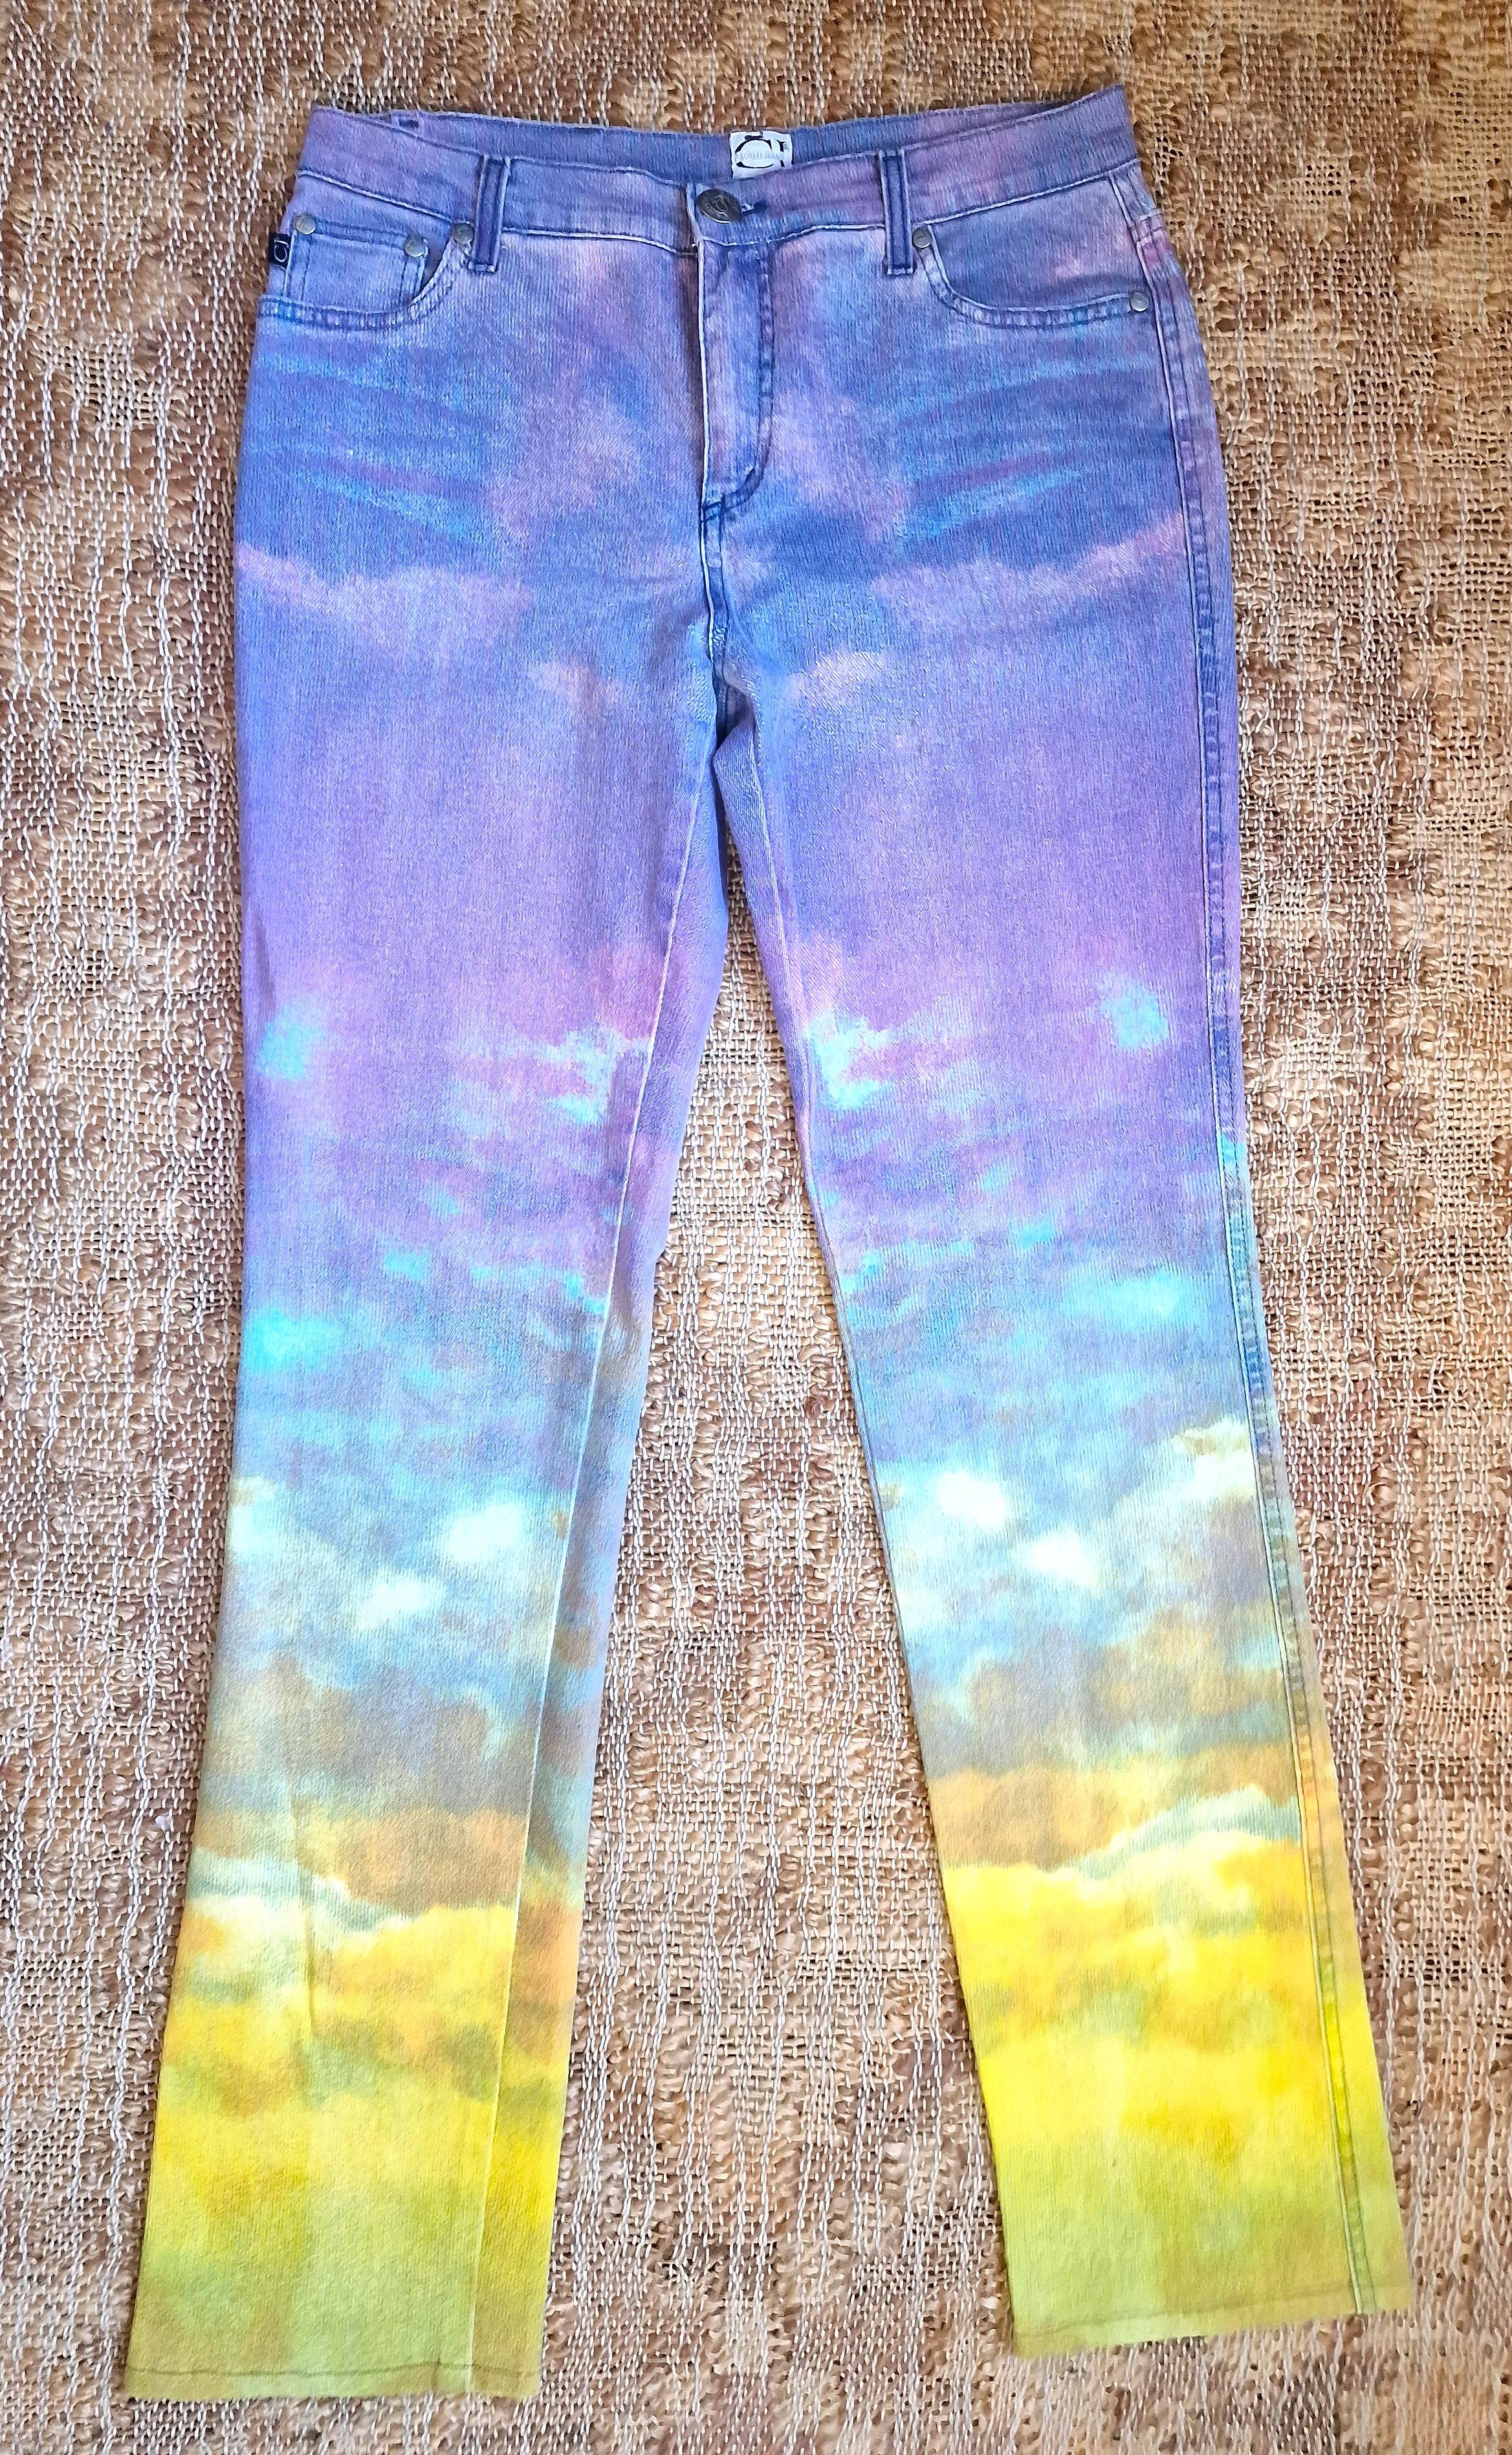 Rainbow pants by Roberto Cavalli!
Wonderful colours!

EXCELLENT condition!

SIZE
Large.
Marked size: 32.
Length: 106 cm / 41.7 inch
Waist: 37 cm / 14.6 inch
Hips: 50 cm / 19.7 inch
Rise: 27 cm / 10.6 inch
inner leg: 82 cm / 32.3 inch

Made in  Italy!